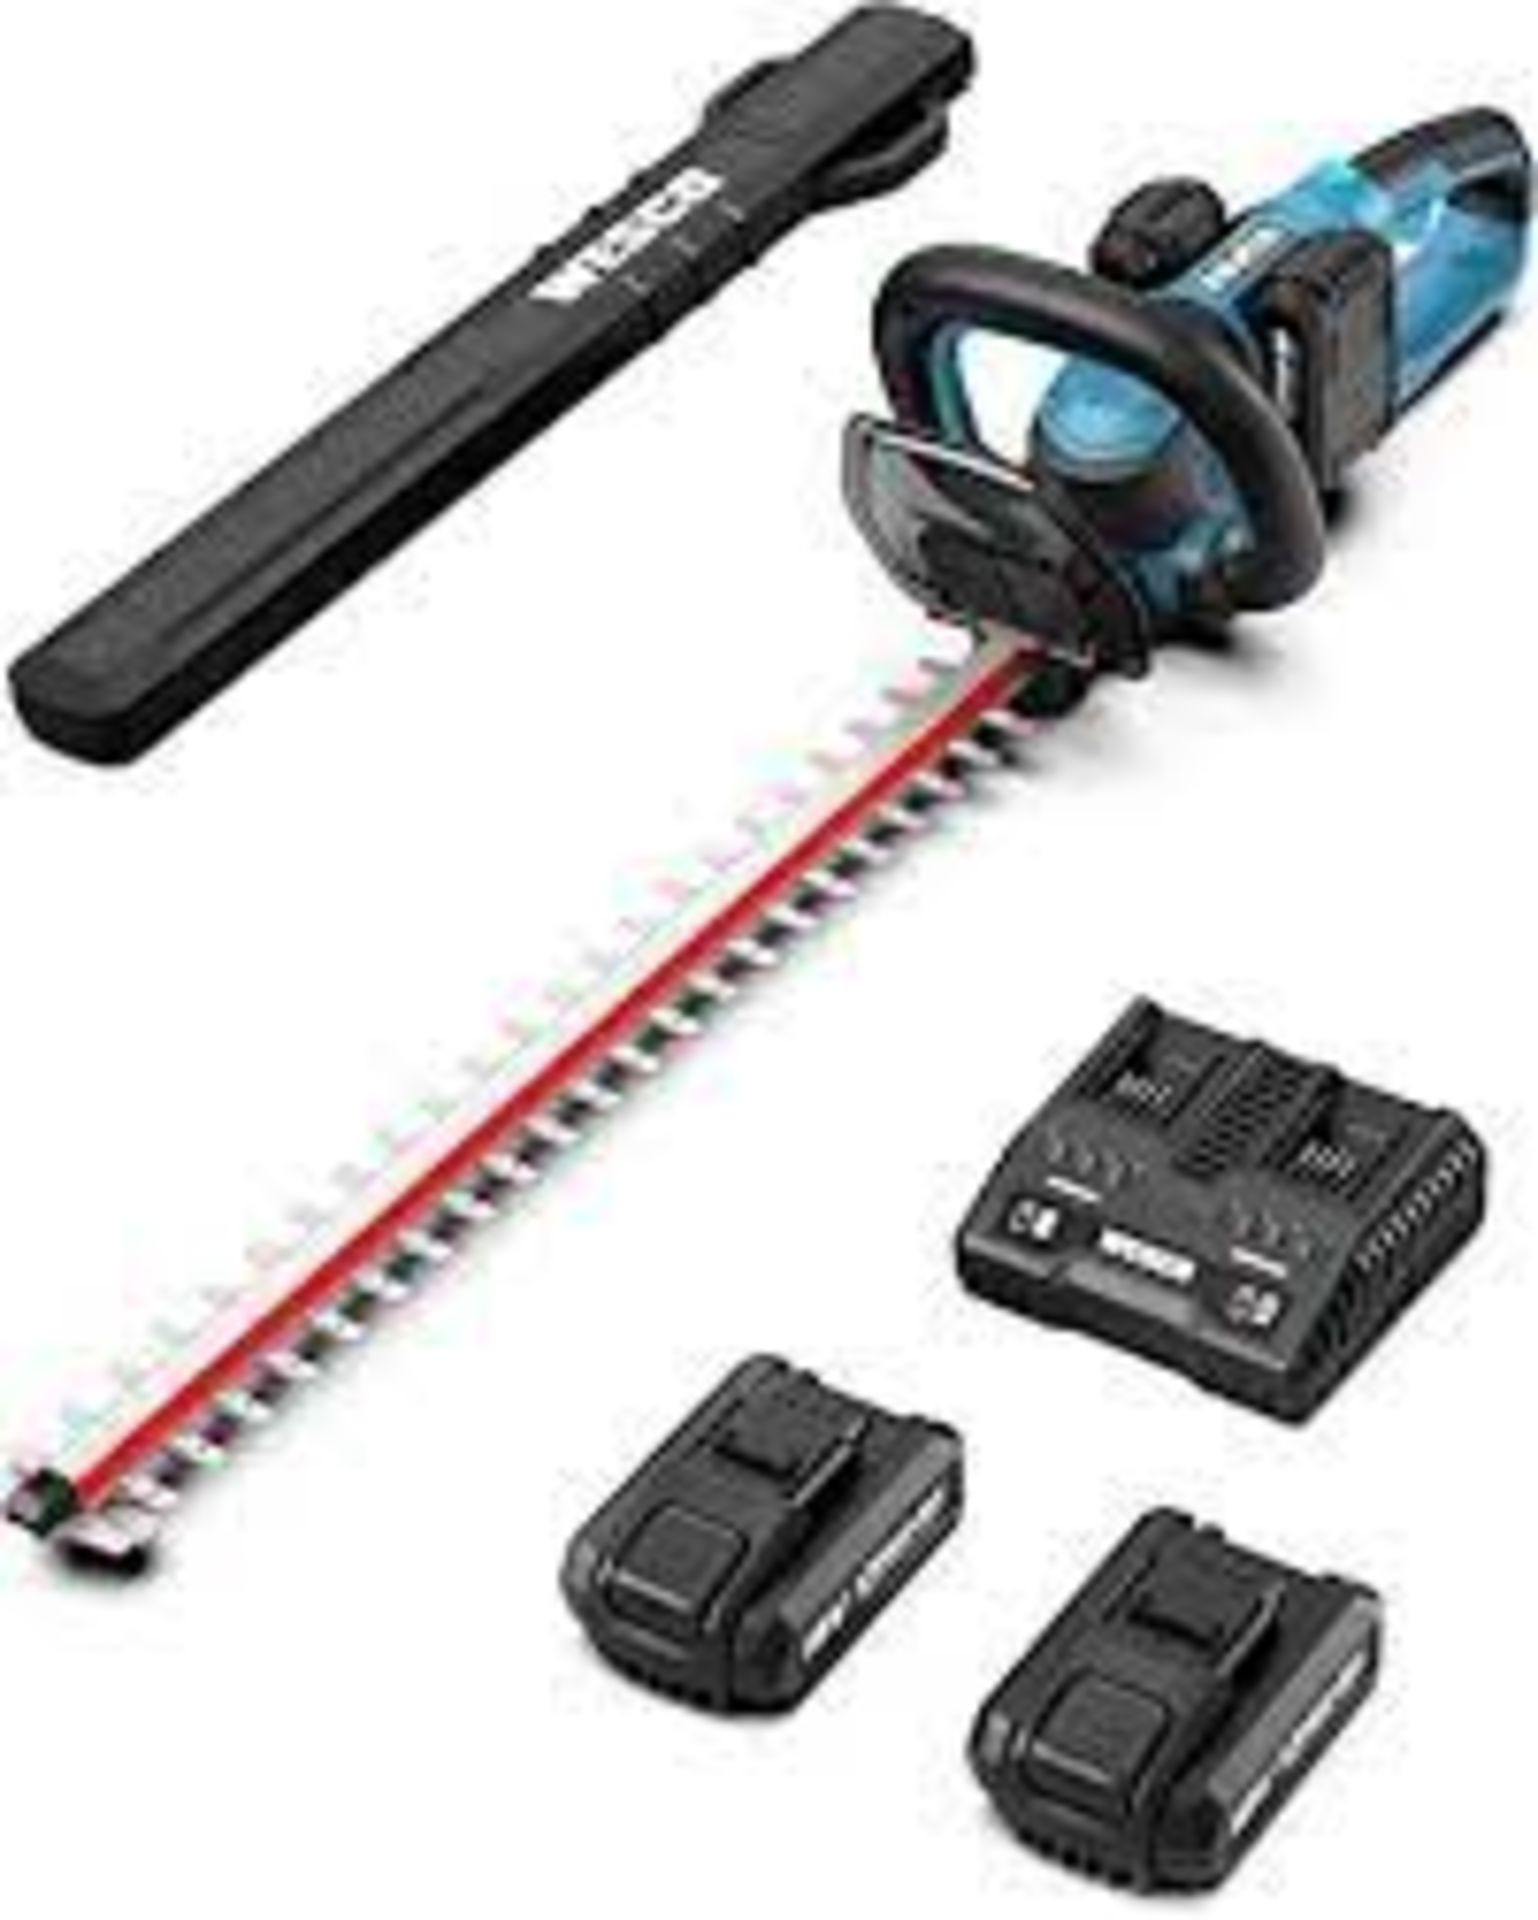 New & Boxed WESCO Cordless Hedge Trimmer & Hedge Cutter with18V Lithium-Ion Battery, 510 mm